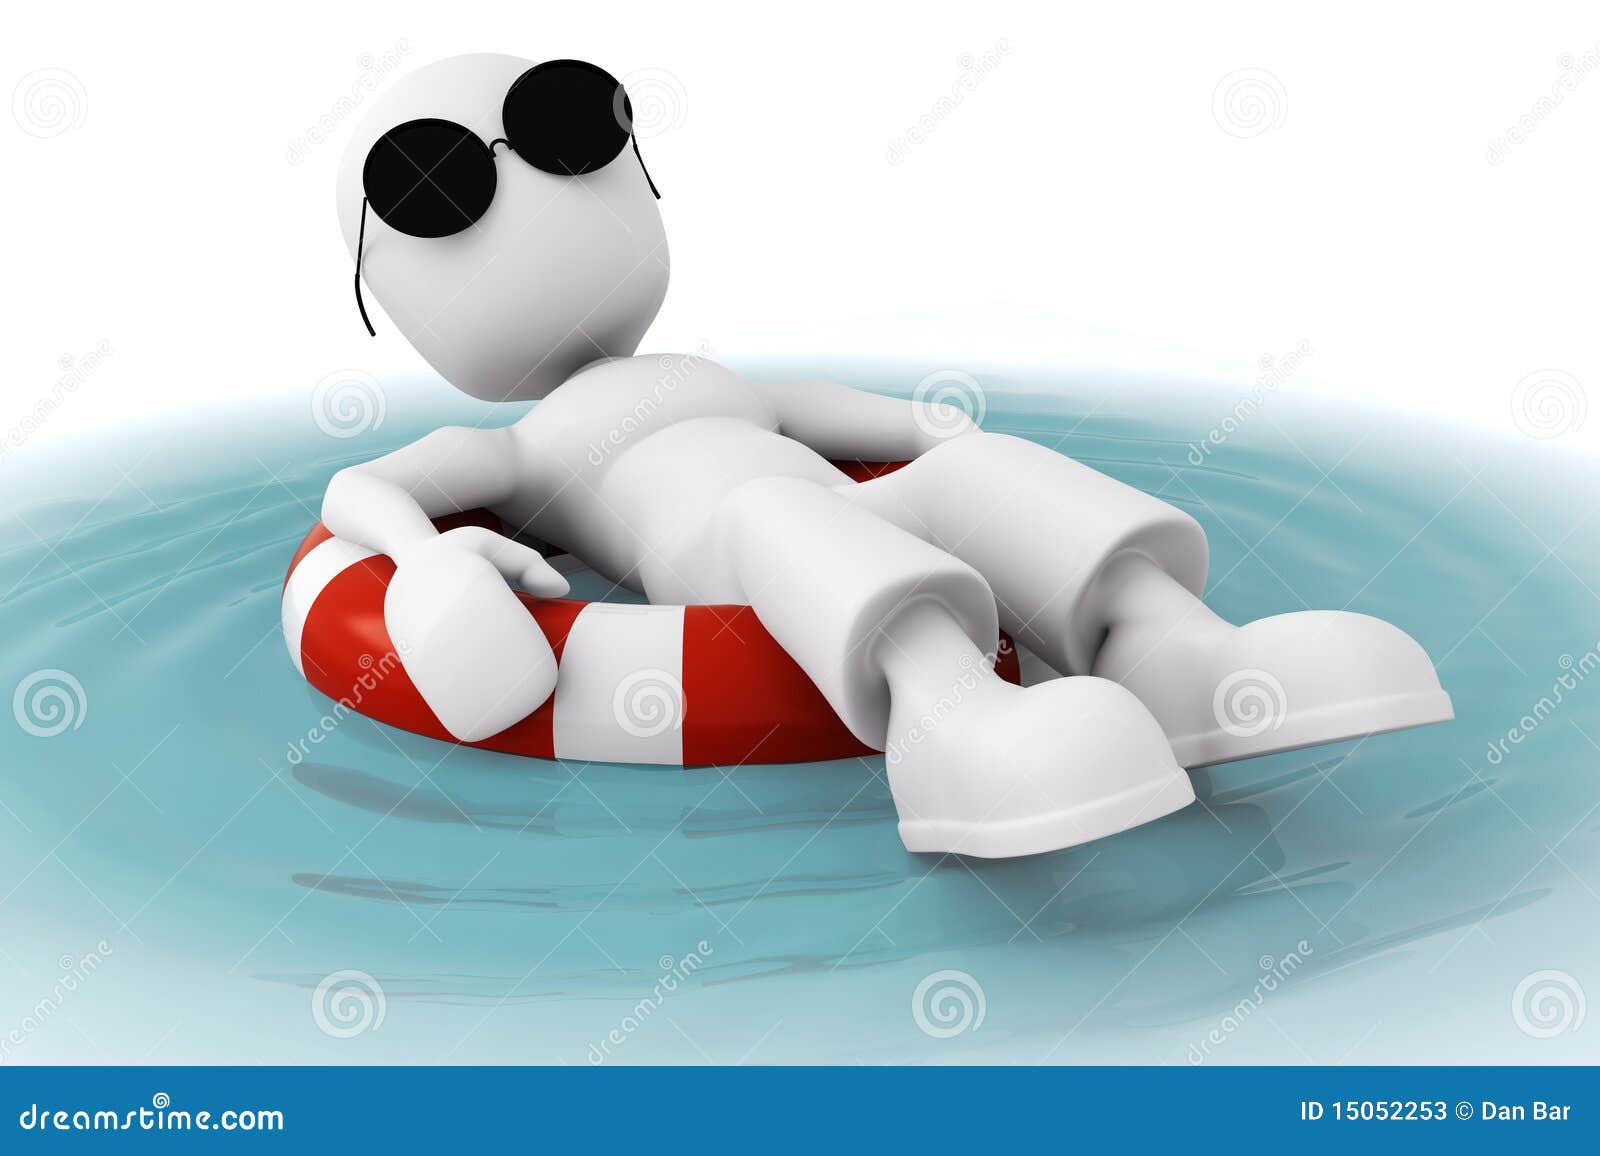 3d man, relaxing in a pool stock illustration 